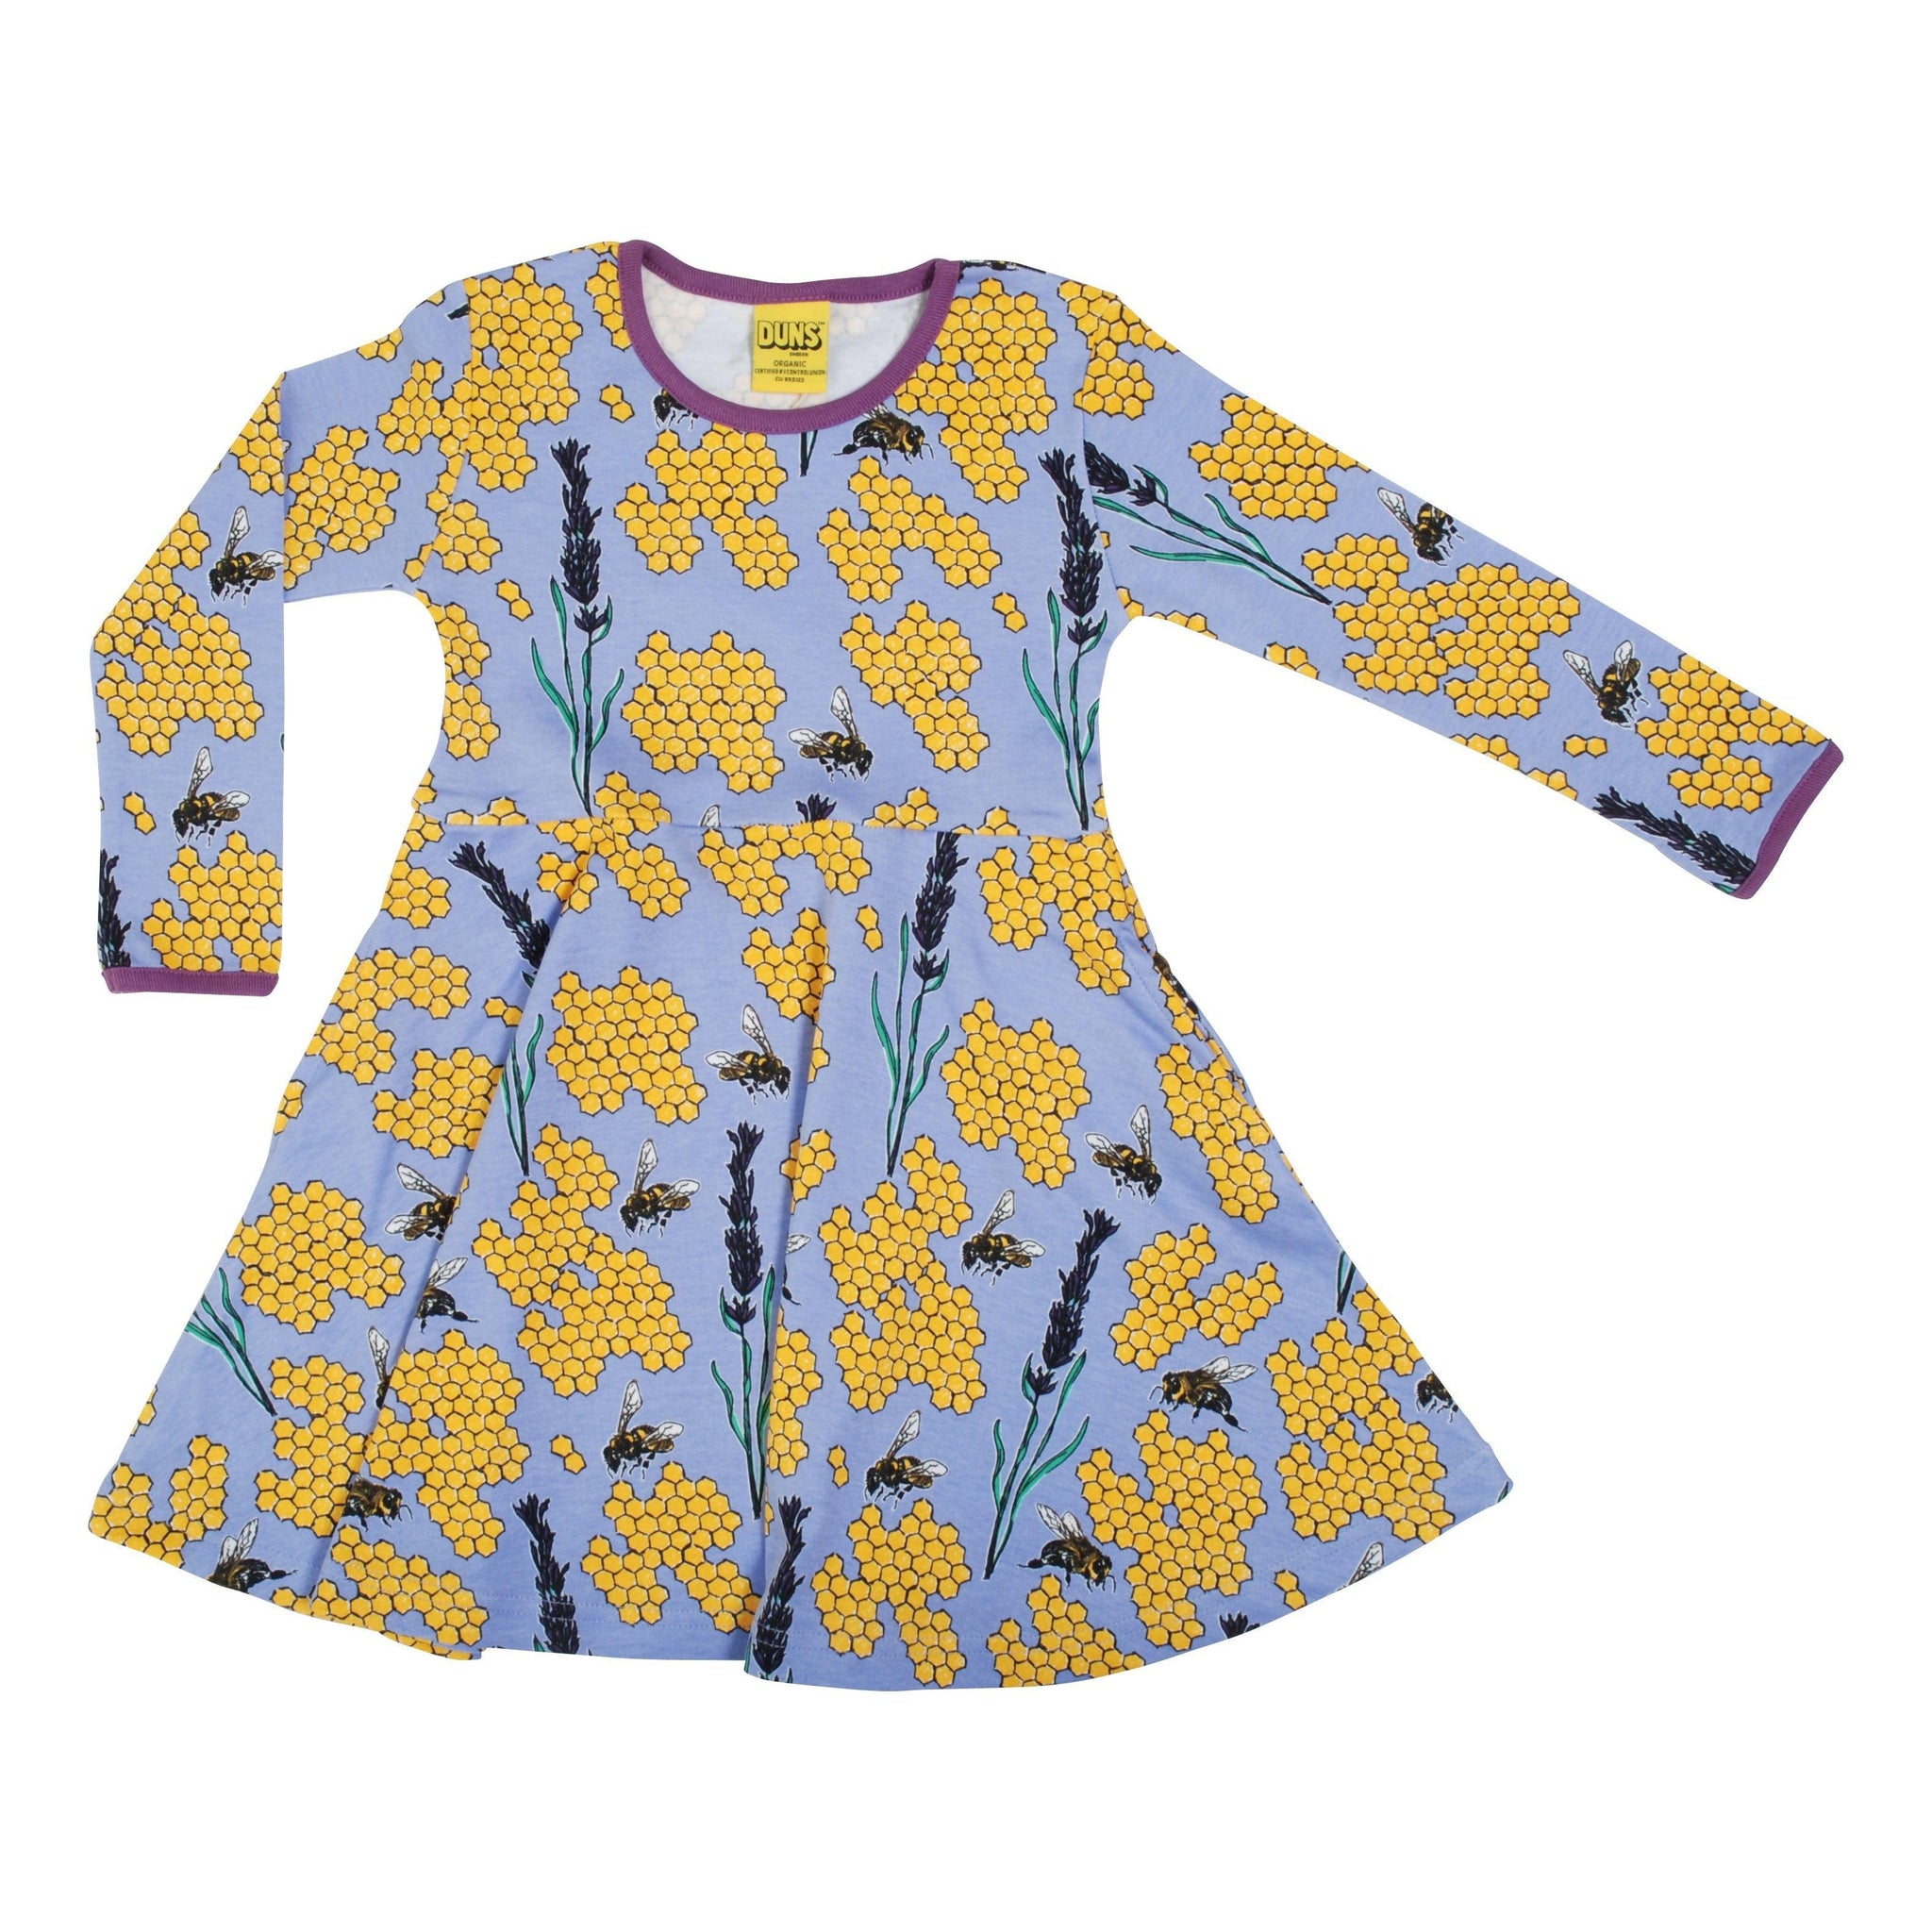 DUNS Sweden - Bee and Grape Long Sleeved Skater Dress (12 Years)